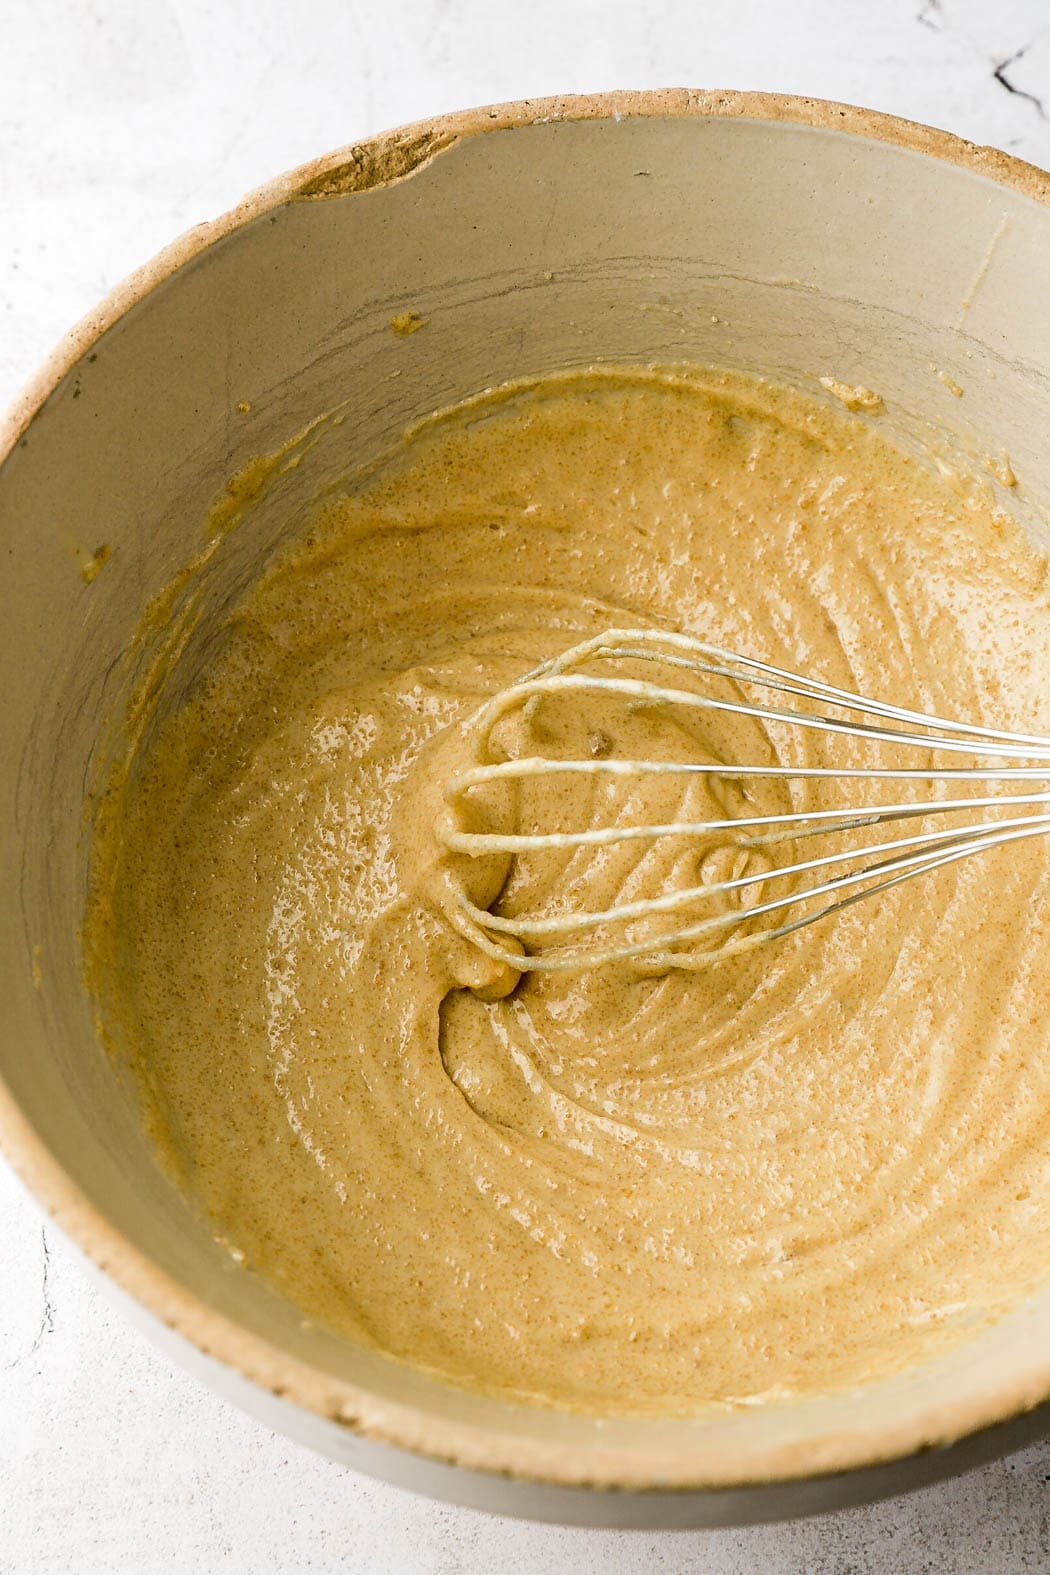 whisk together the brown butter, brown sugar and eggs